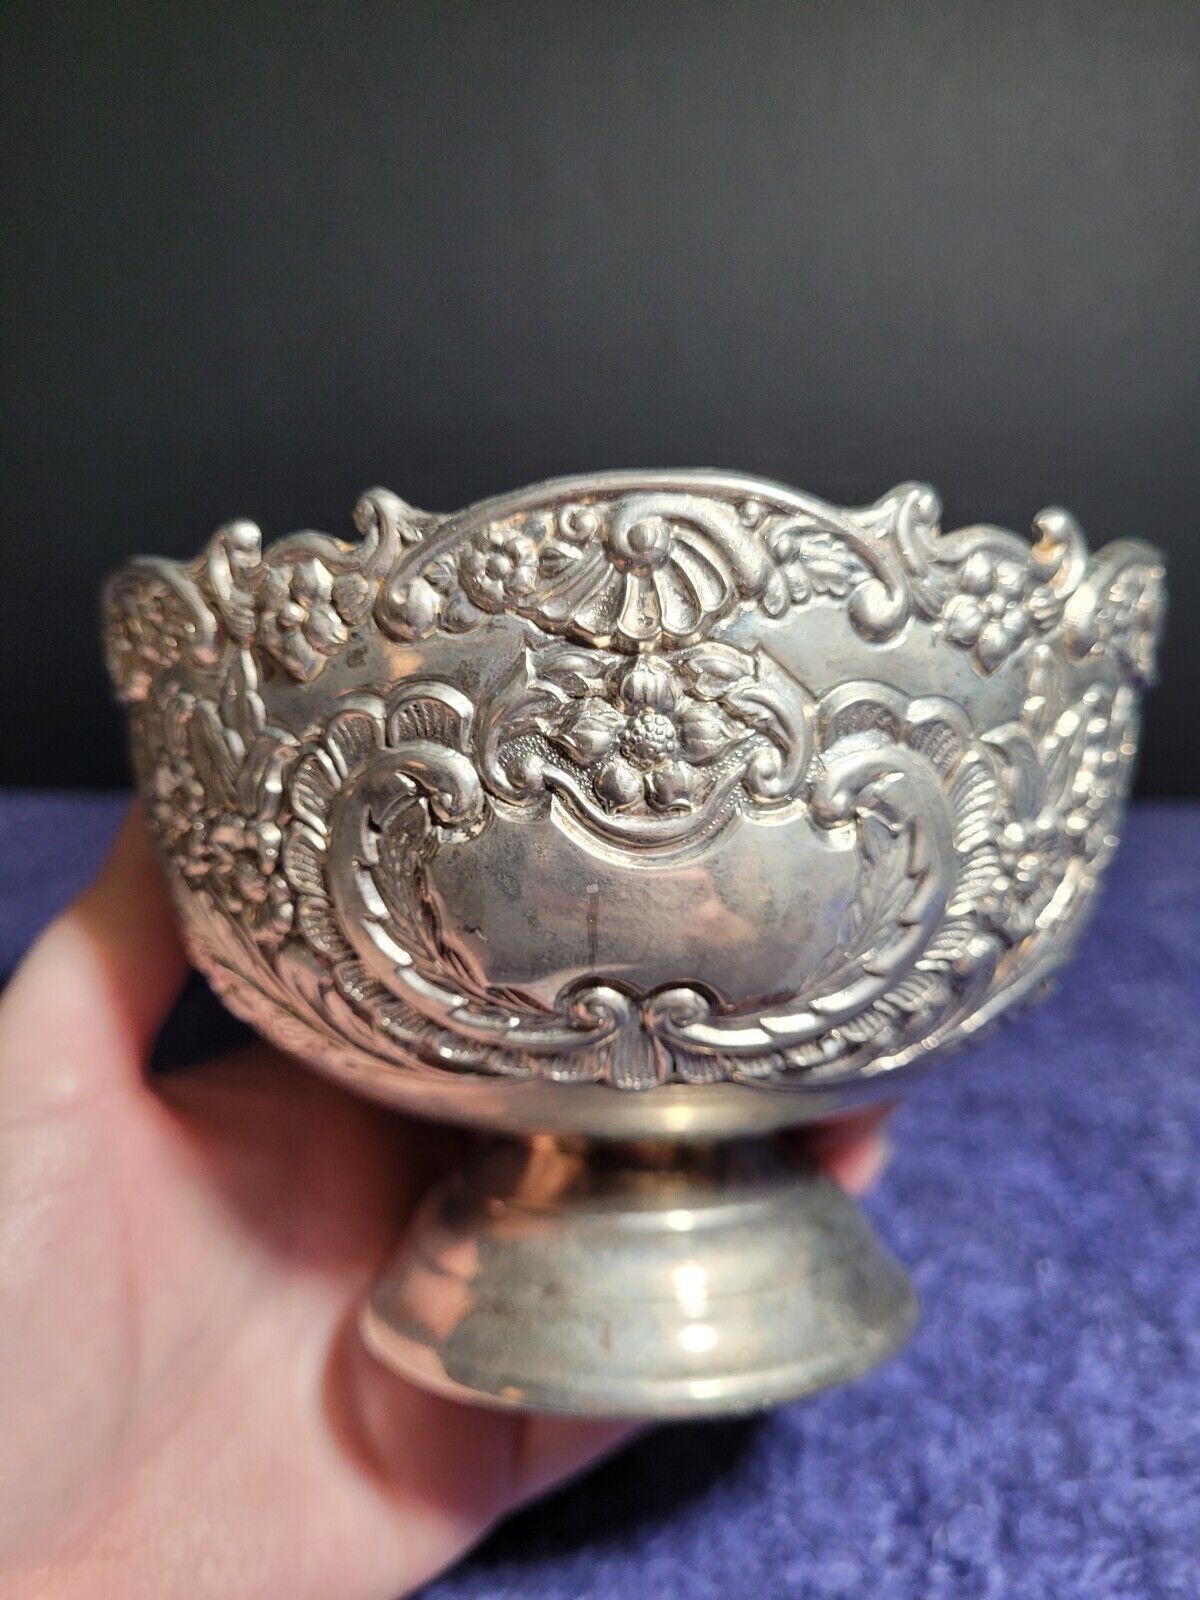 Vintage FB Rogers Silverplate Pedestal Bowl with Ornate High-Relief Design